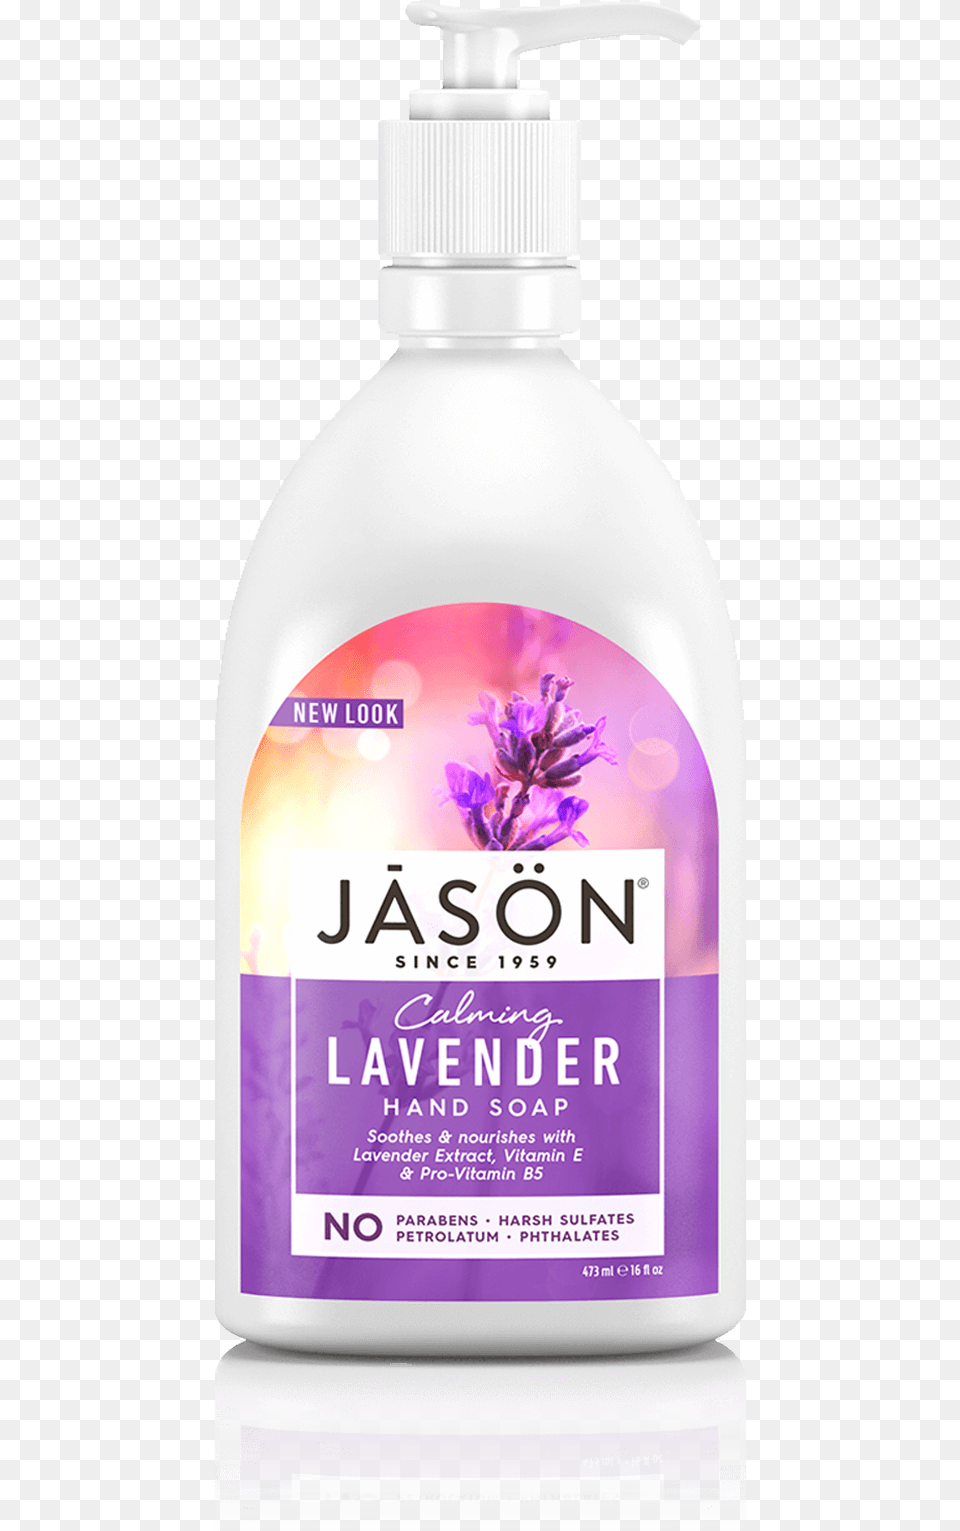 Share Jason Natural Products Body Wash Relaxing Chamomile, Bottle, Lotion, Herbal, Herbs Free Png